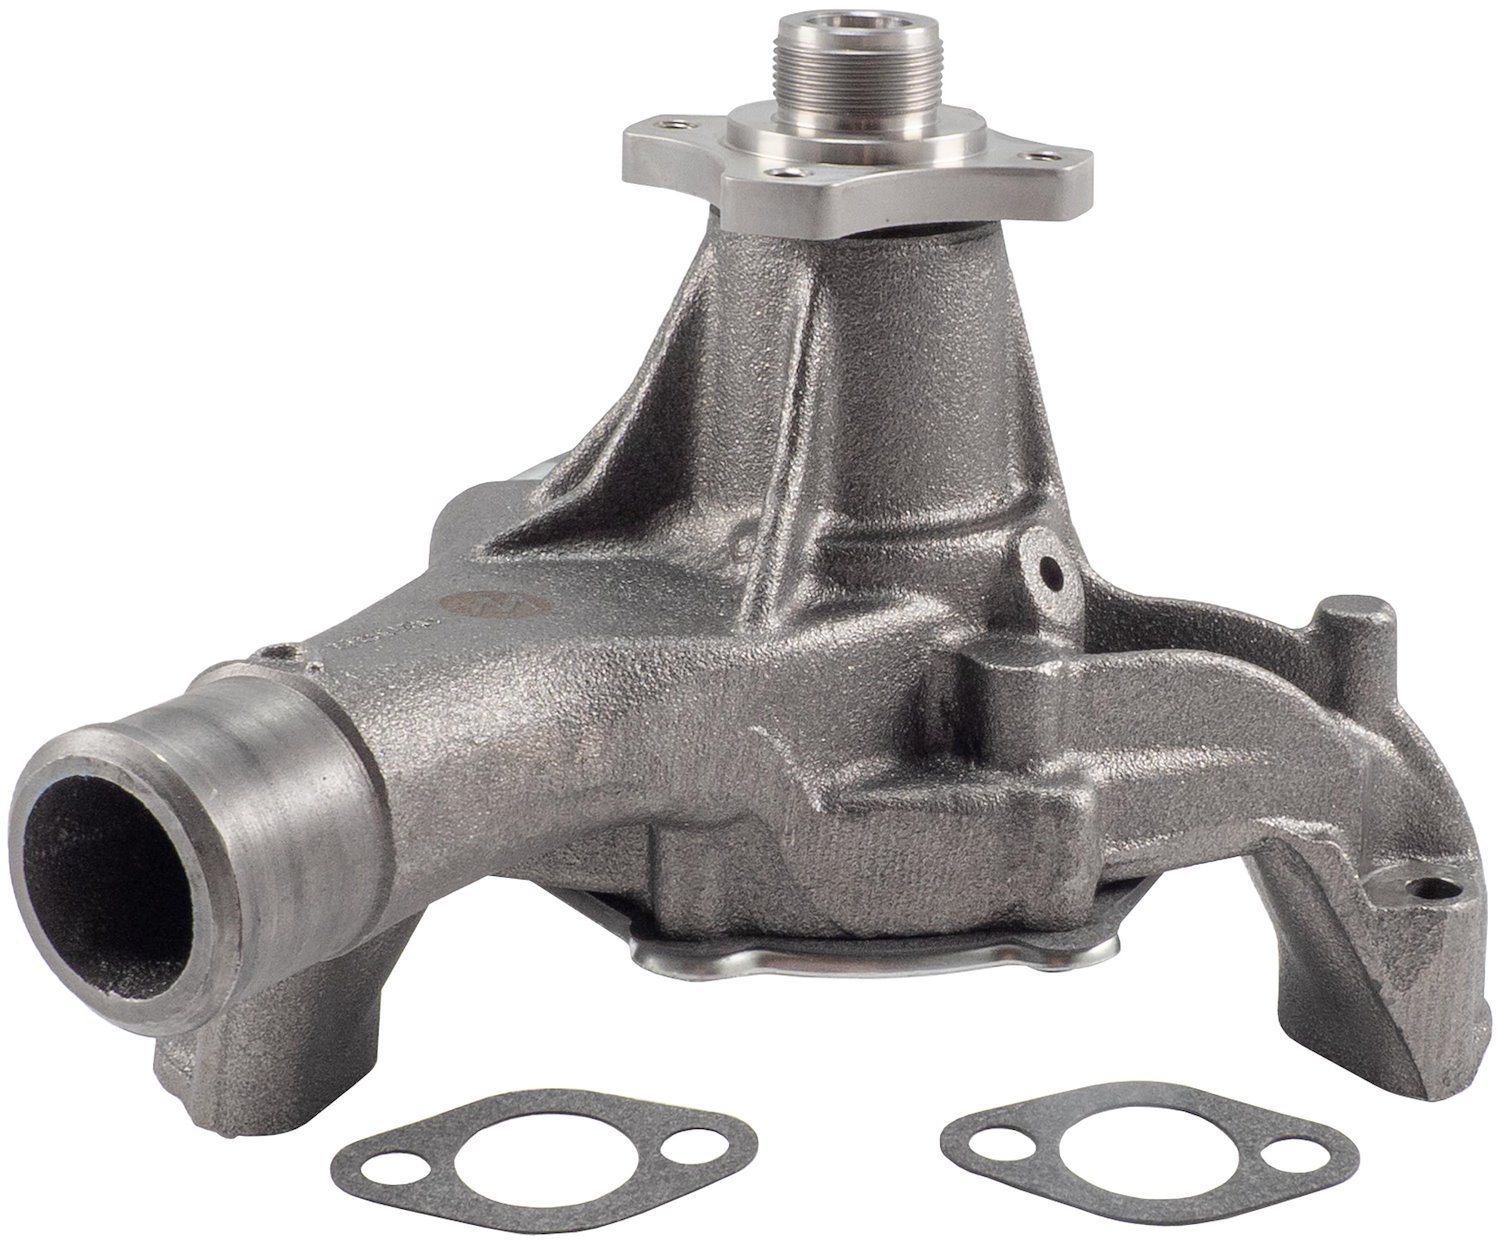 Water Pump Fits Select 2000-2014 GM 4.3/5.0/5.7L Engines